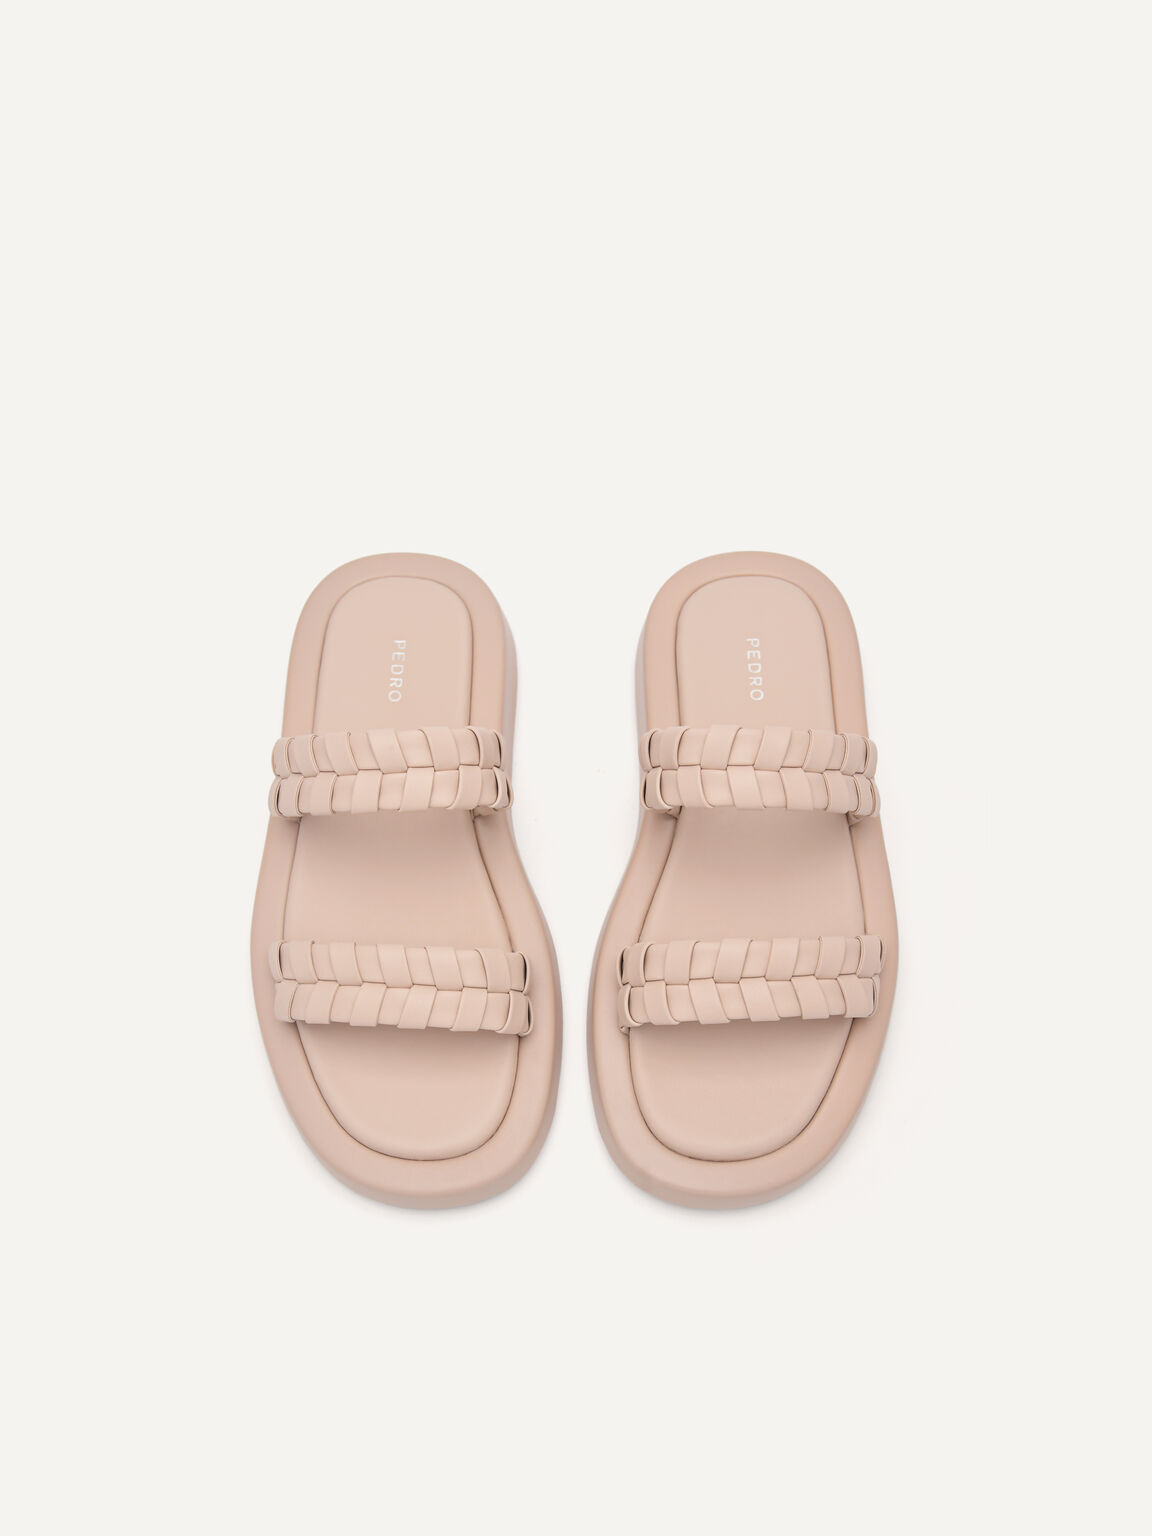 Palma Woven Sandals, Nude